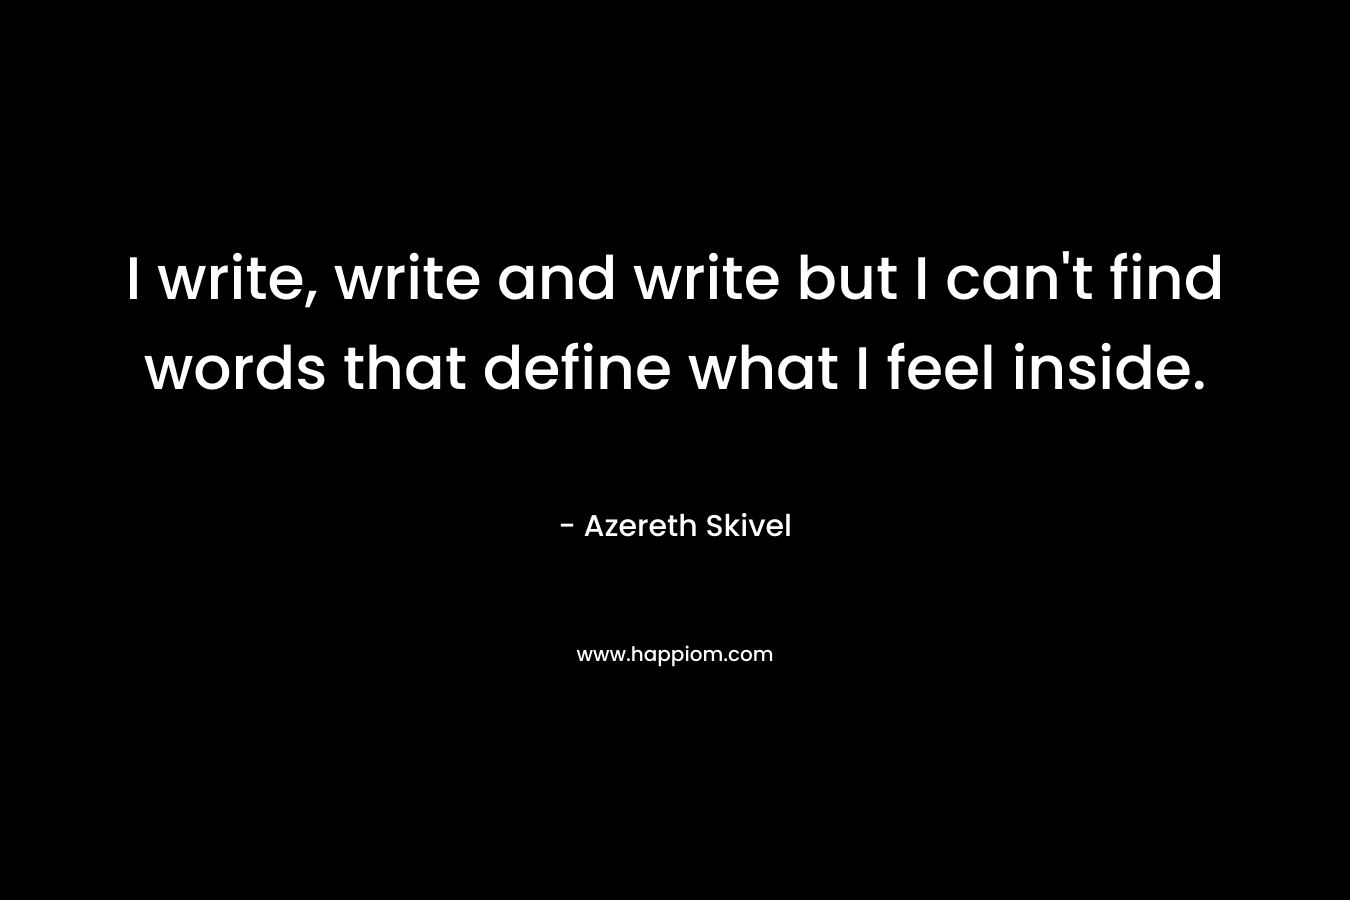 I write, write and write but I can't find words that define what I feel inside.